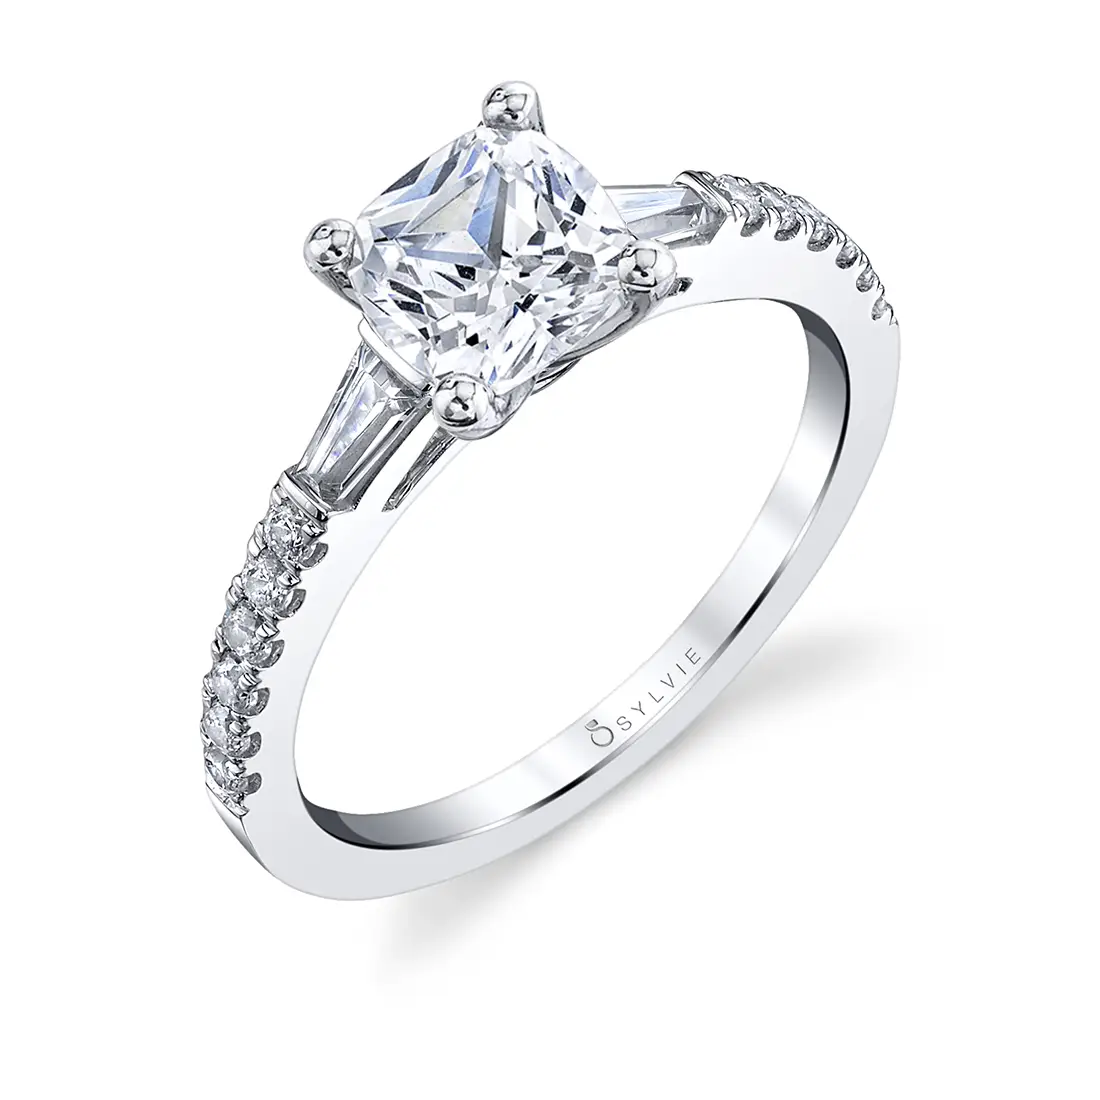 Cushion Cut Engagement Ring with Baguettes